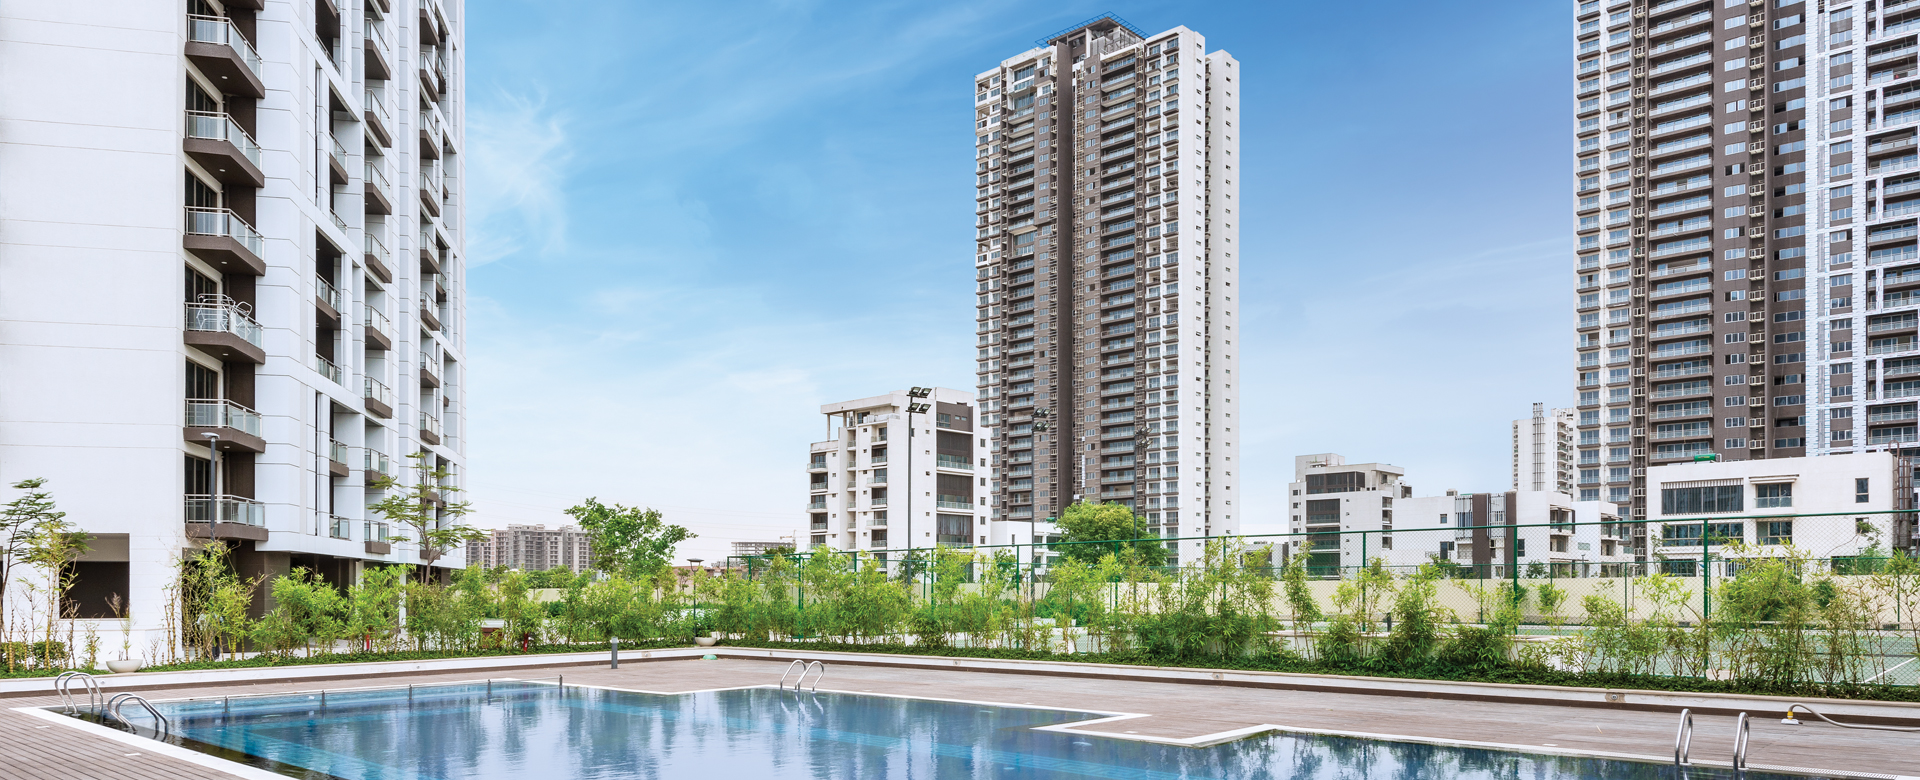 Live life at the top with luxury apartments for rent in gurgaon